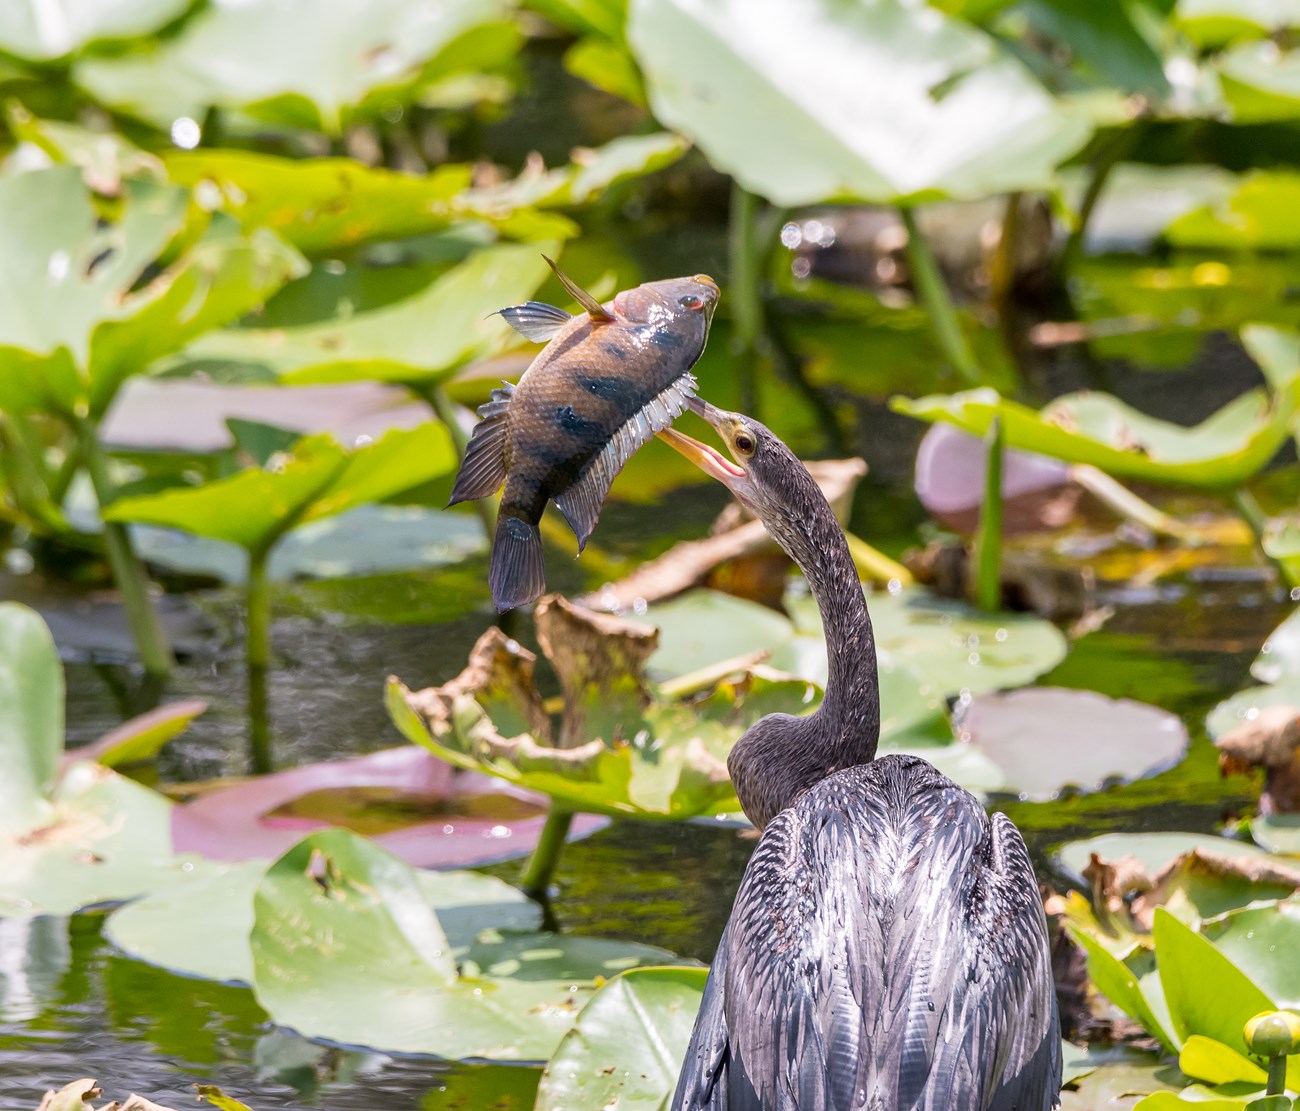 A black bird with a long slender neck has pierced a fish through its body with its beak. Many green aquatic plants and a lake can be seen in the background.